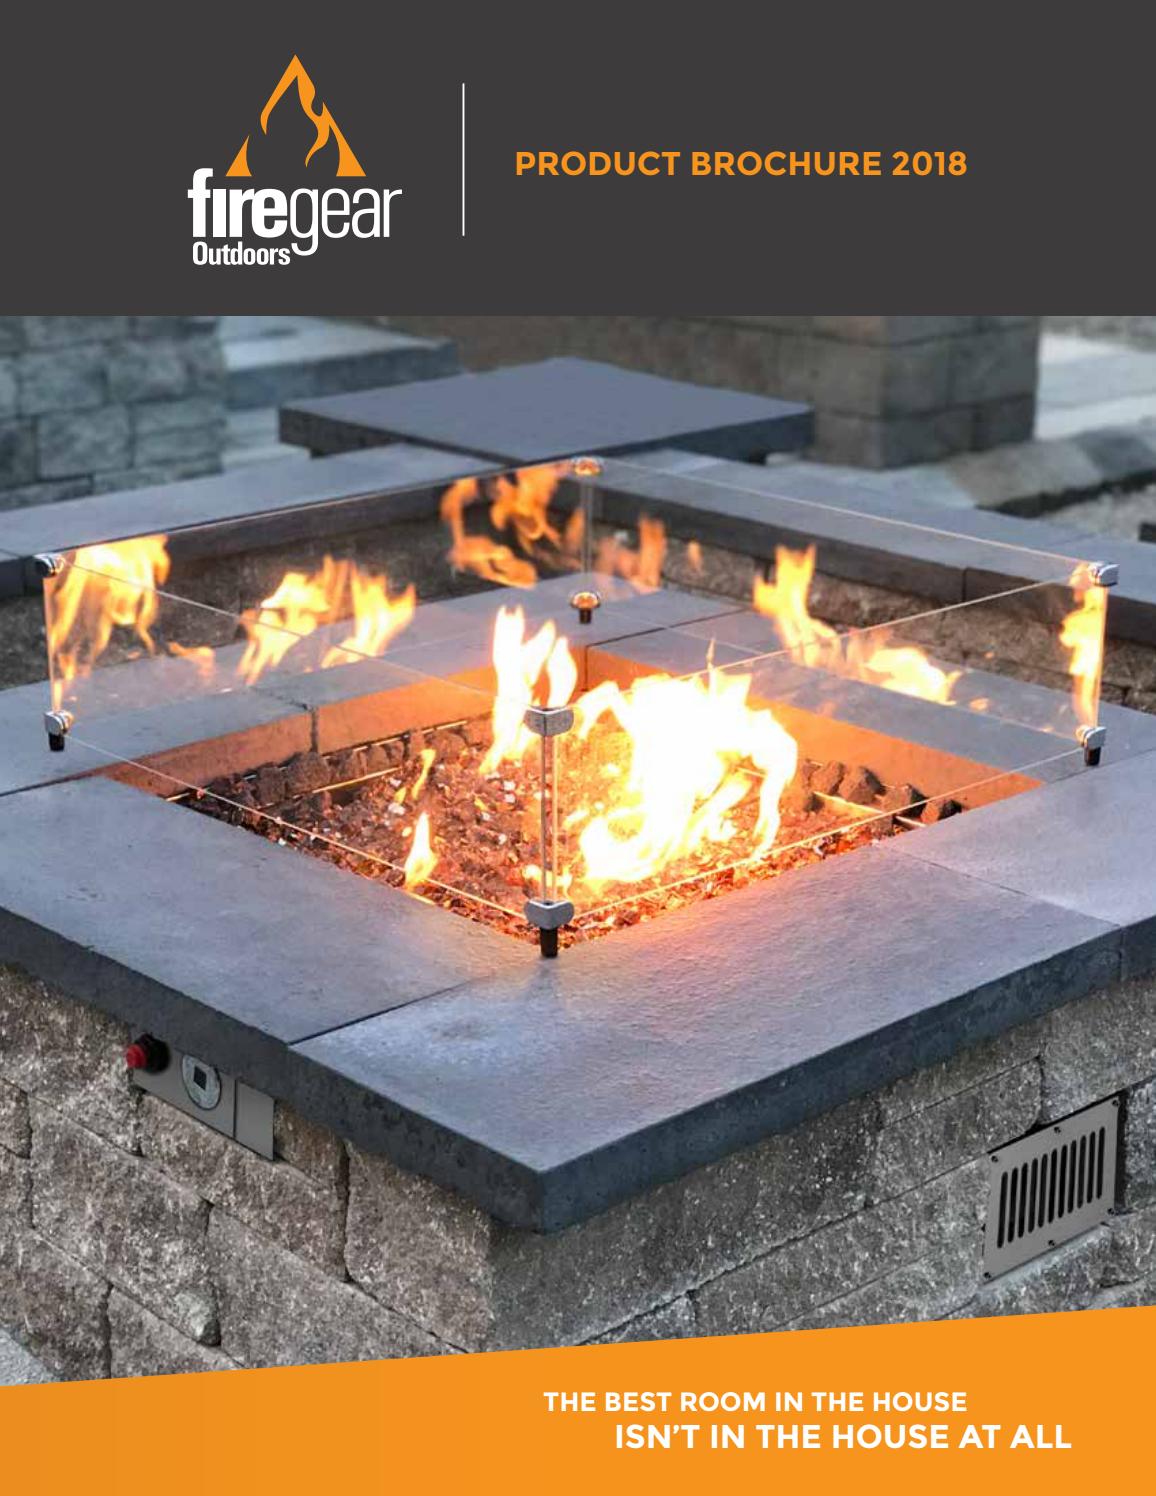 Gas Fireplace Electronic Ignition Kit Elegant Firegear Product Brochure by Skytech Products Group issuu